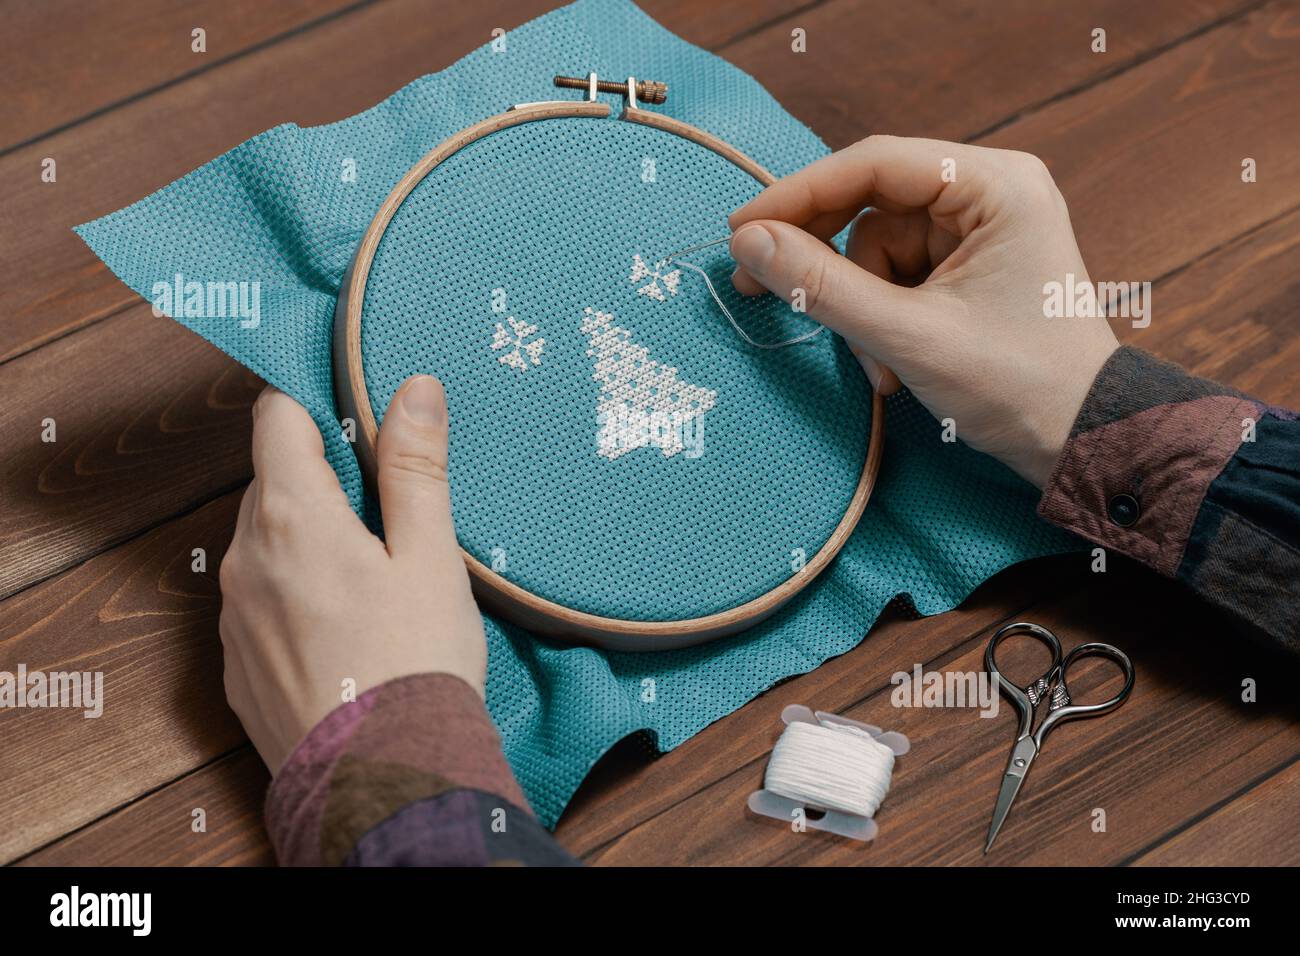 Woman making stitch on canvas and embroidering pattern. Stock Photo